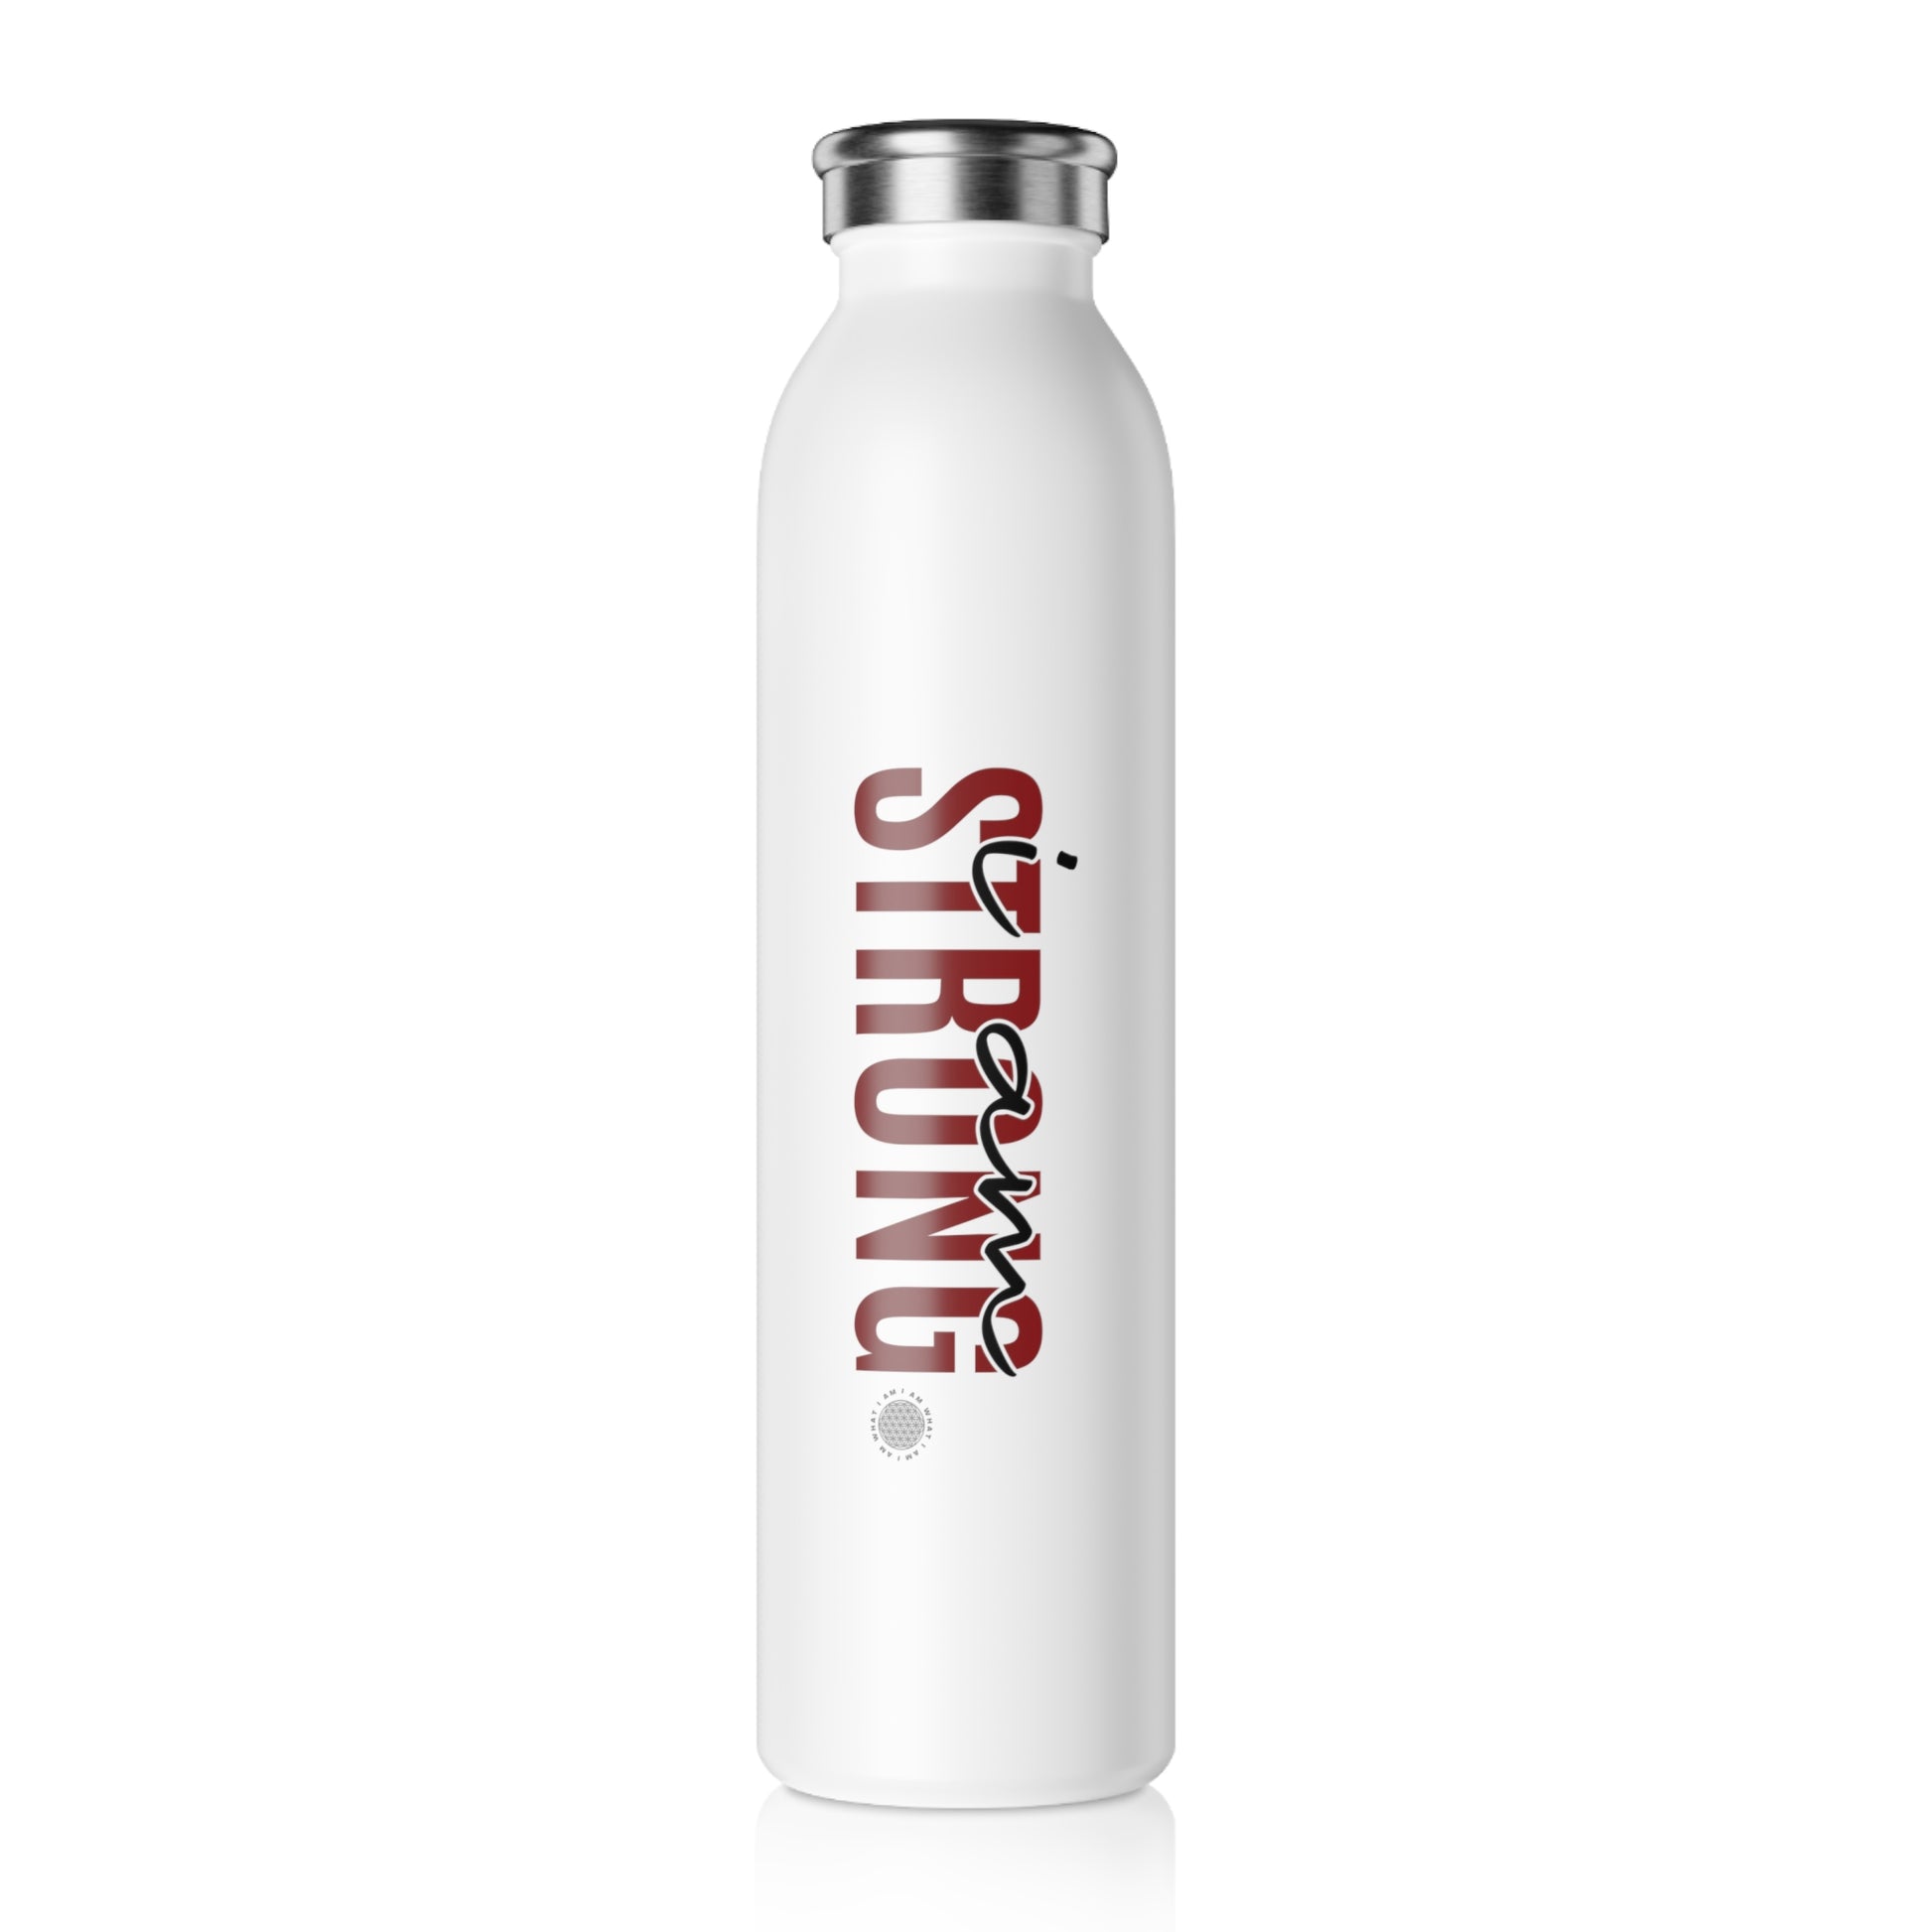 Our I Am Strong affirmation water bottle is one of our positive affirmations for mental health. Positive thinking keeps our mindset happy and healthy. This personalized water bottle was designed to become a creator’s favorite canvas of expression.